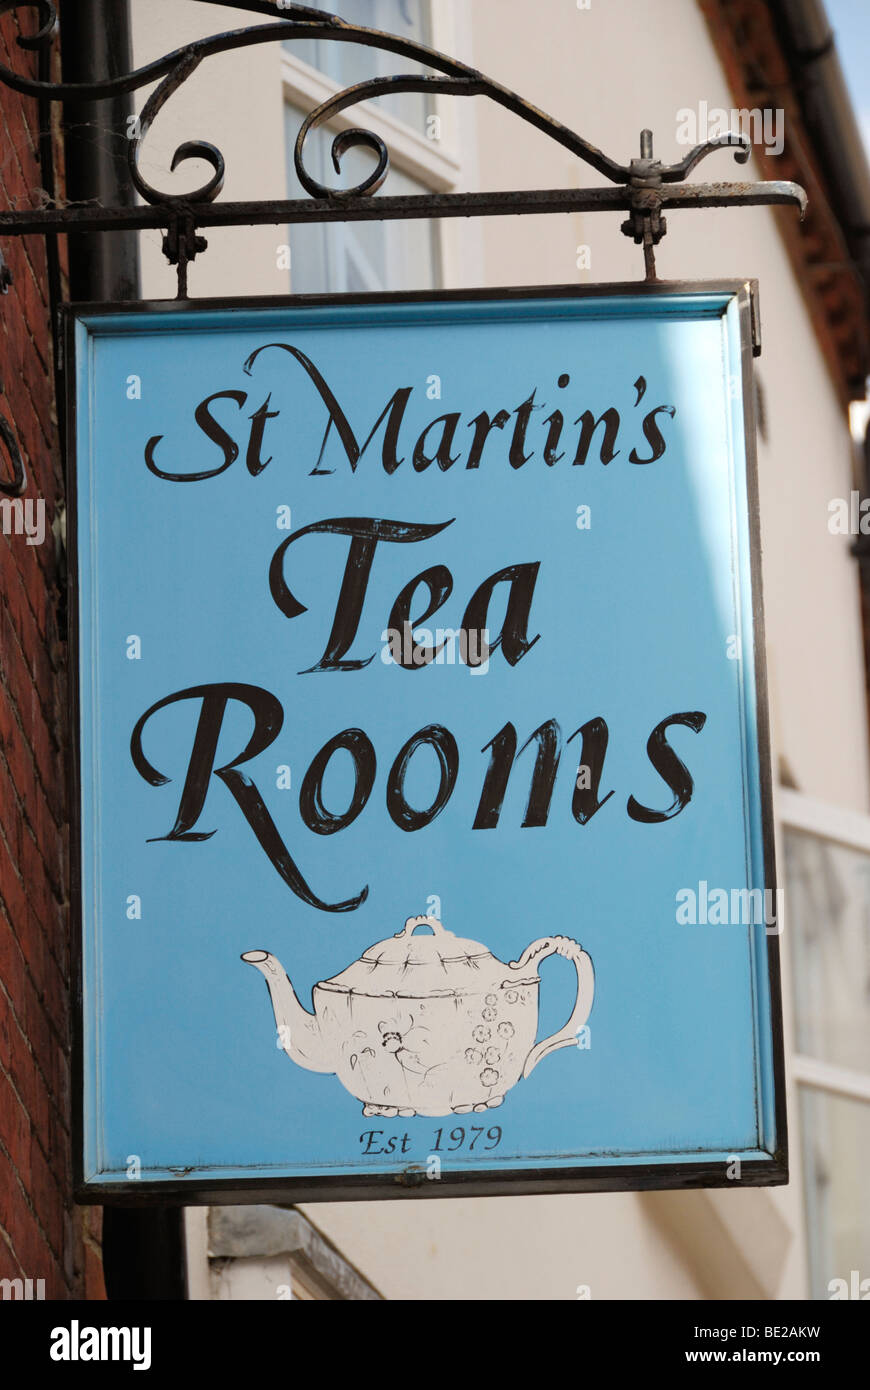 St Martin's Tea Rooms sign in St Martin's Street, Chichester, Sussex, England Stock Photo